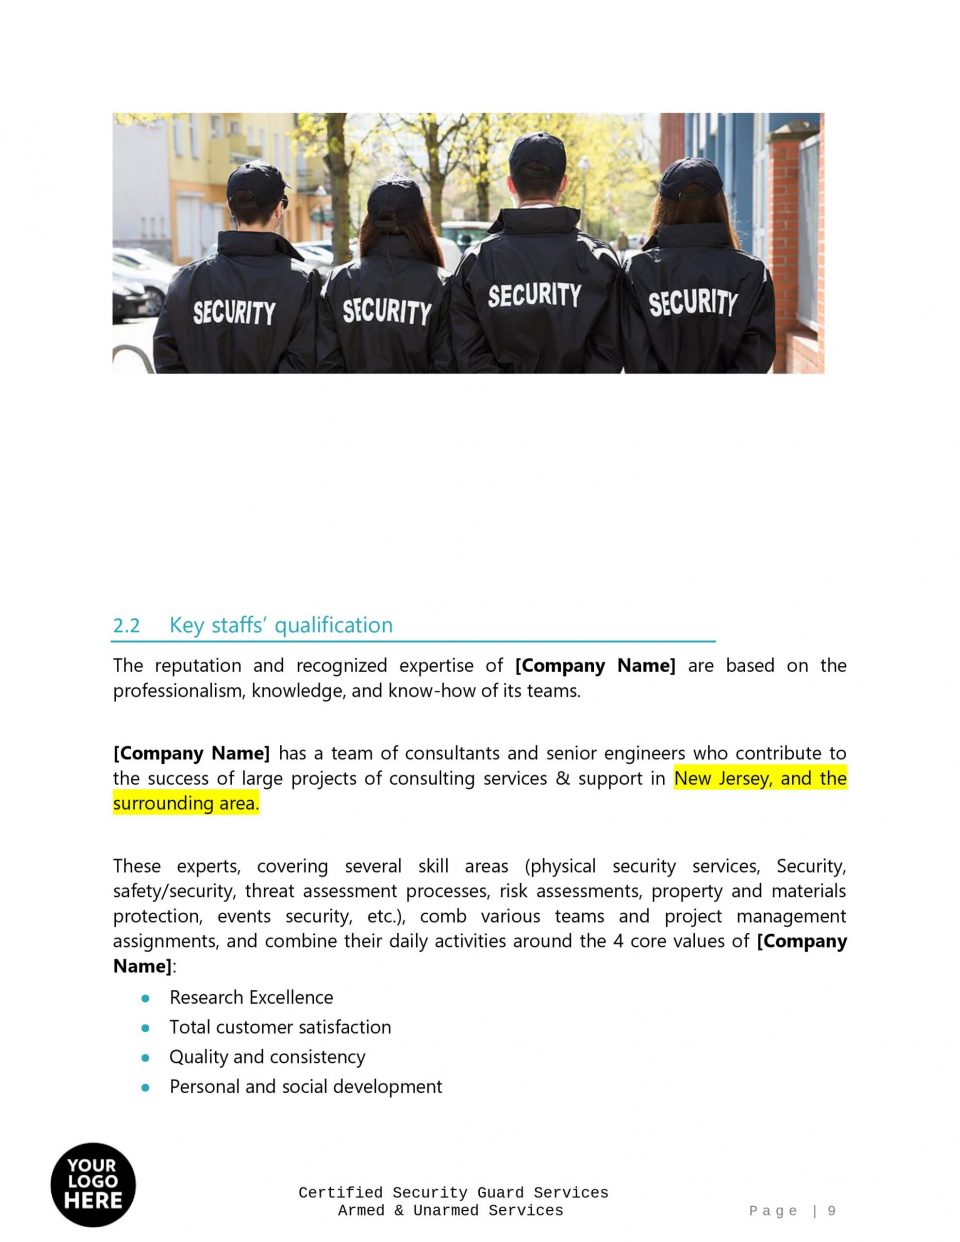 Certified Security Guard Services Template 09 scaled